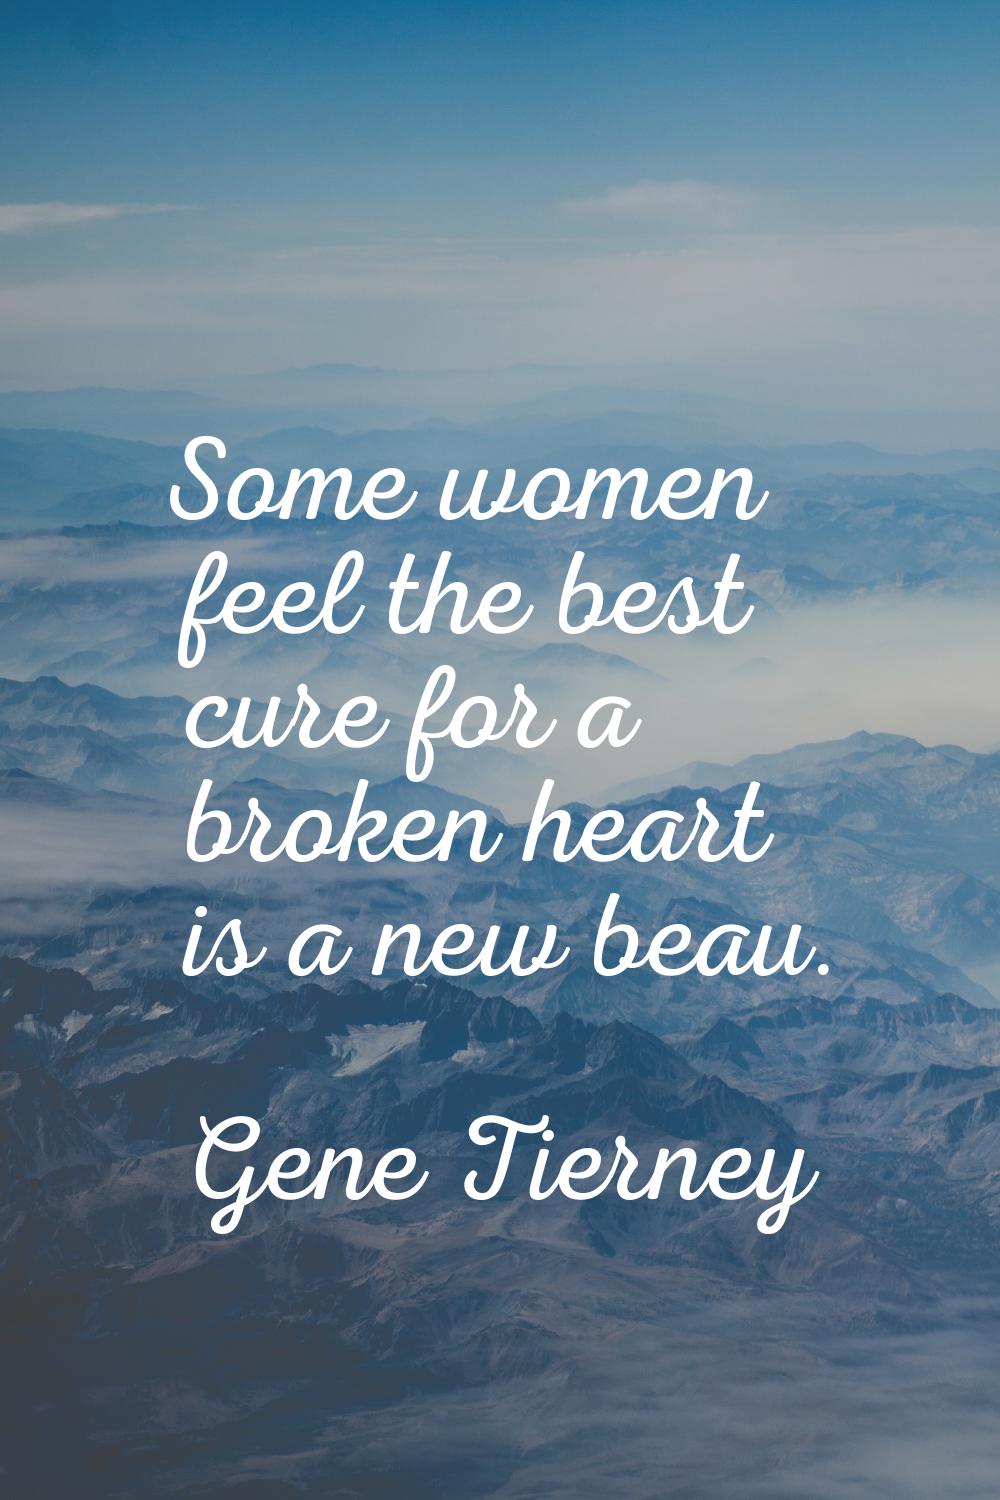 Some women feel the best cure for a broken heart is a new beau.